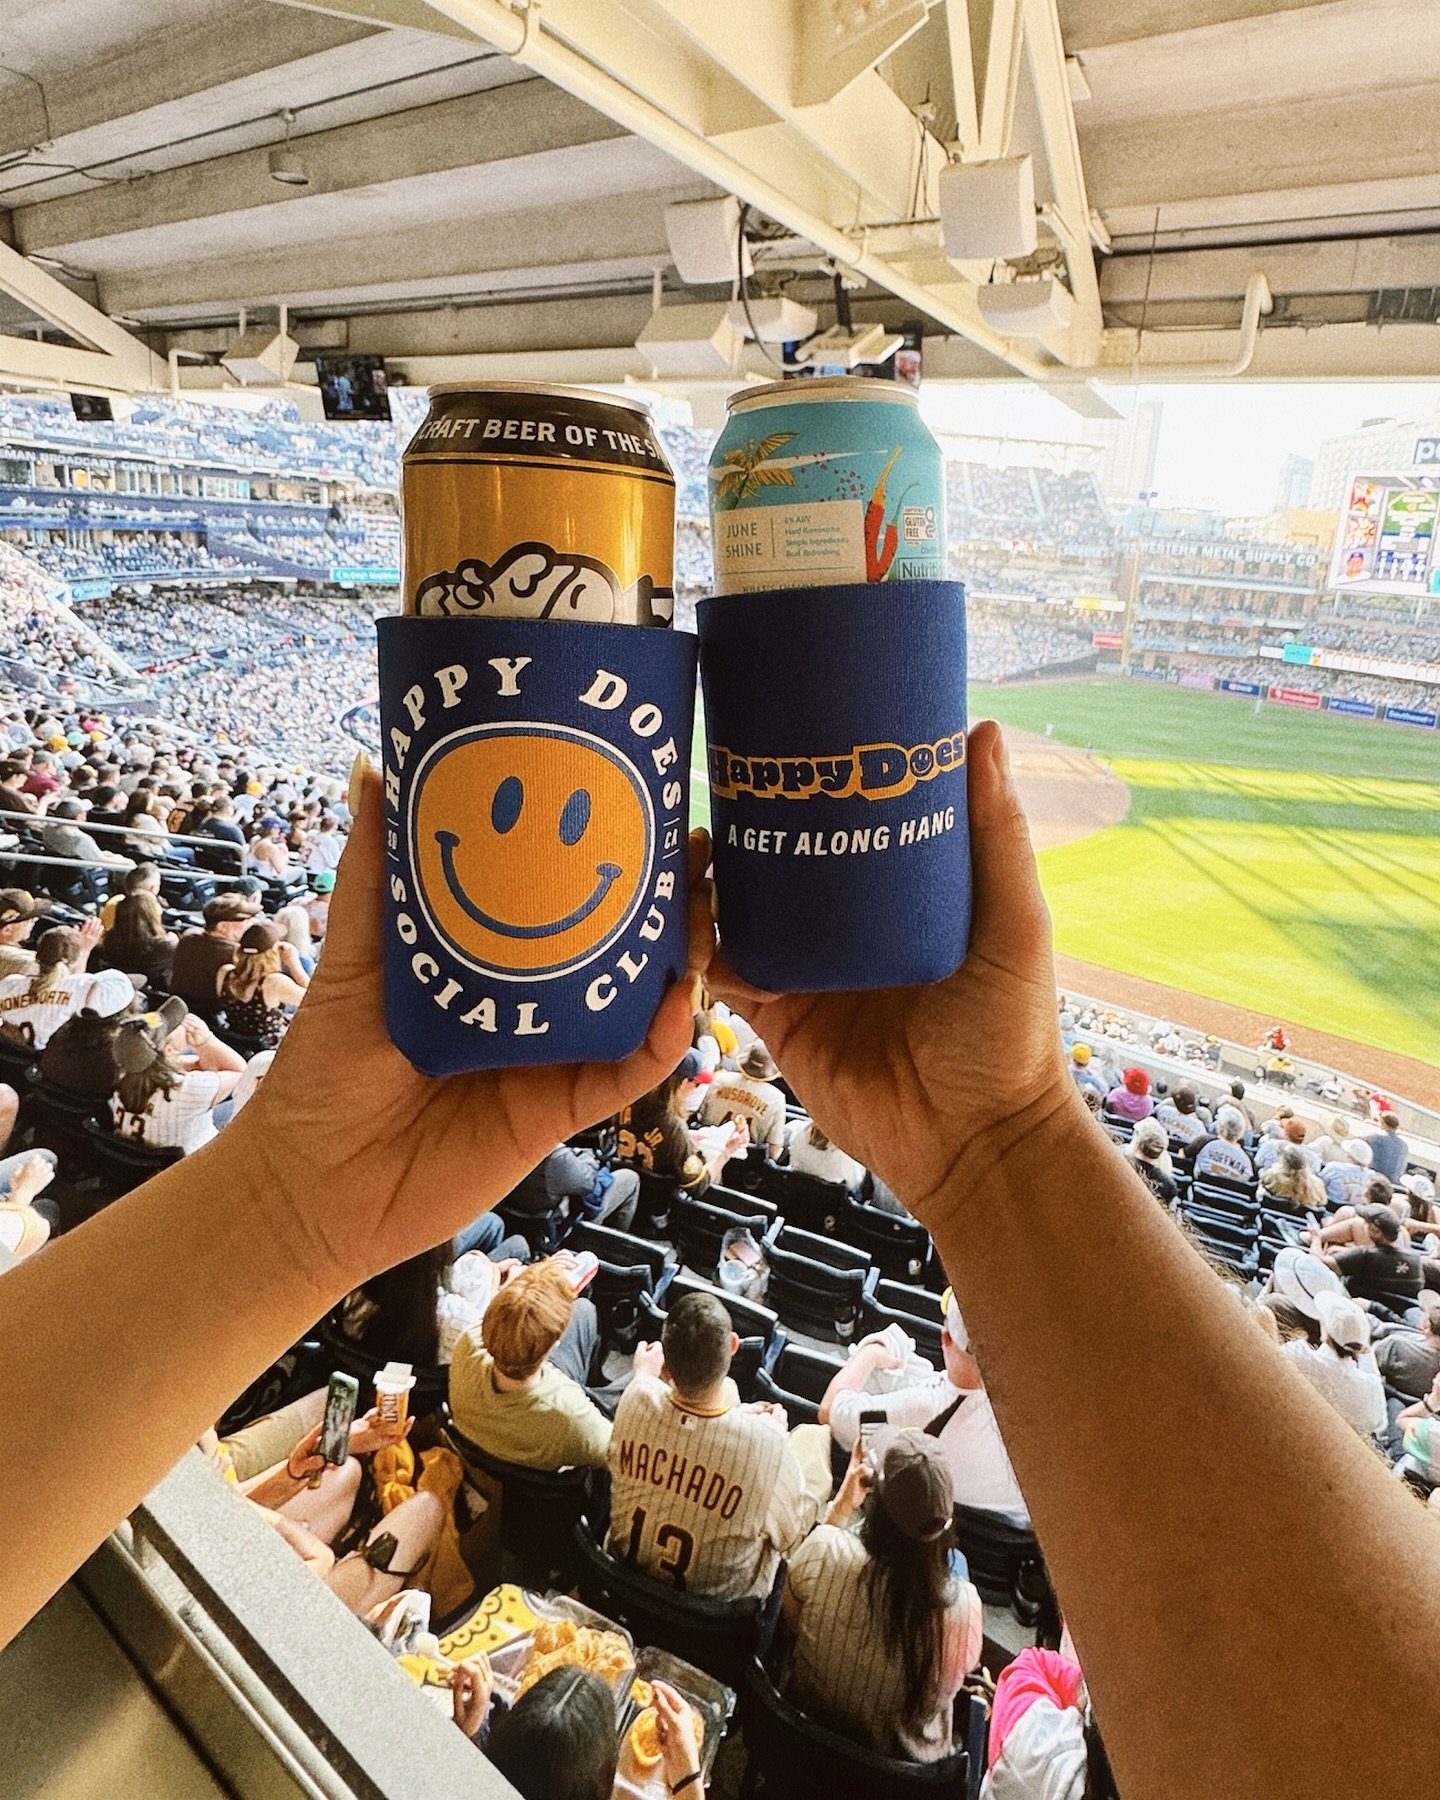 Heading to the game this weekend?! ⚾️ Come grab a HAPPY Koozie and bring it to the ballpark!